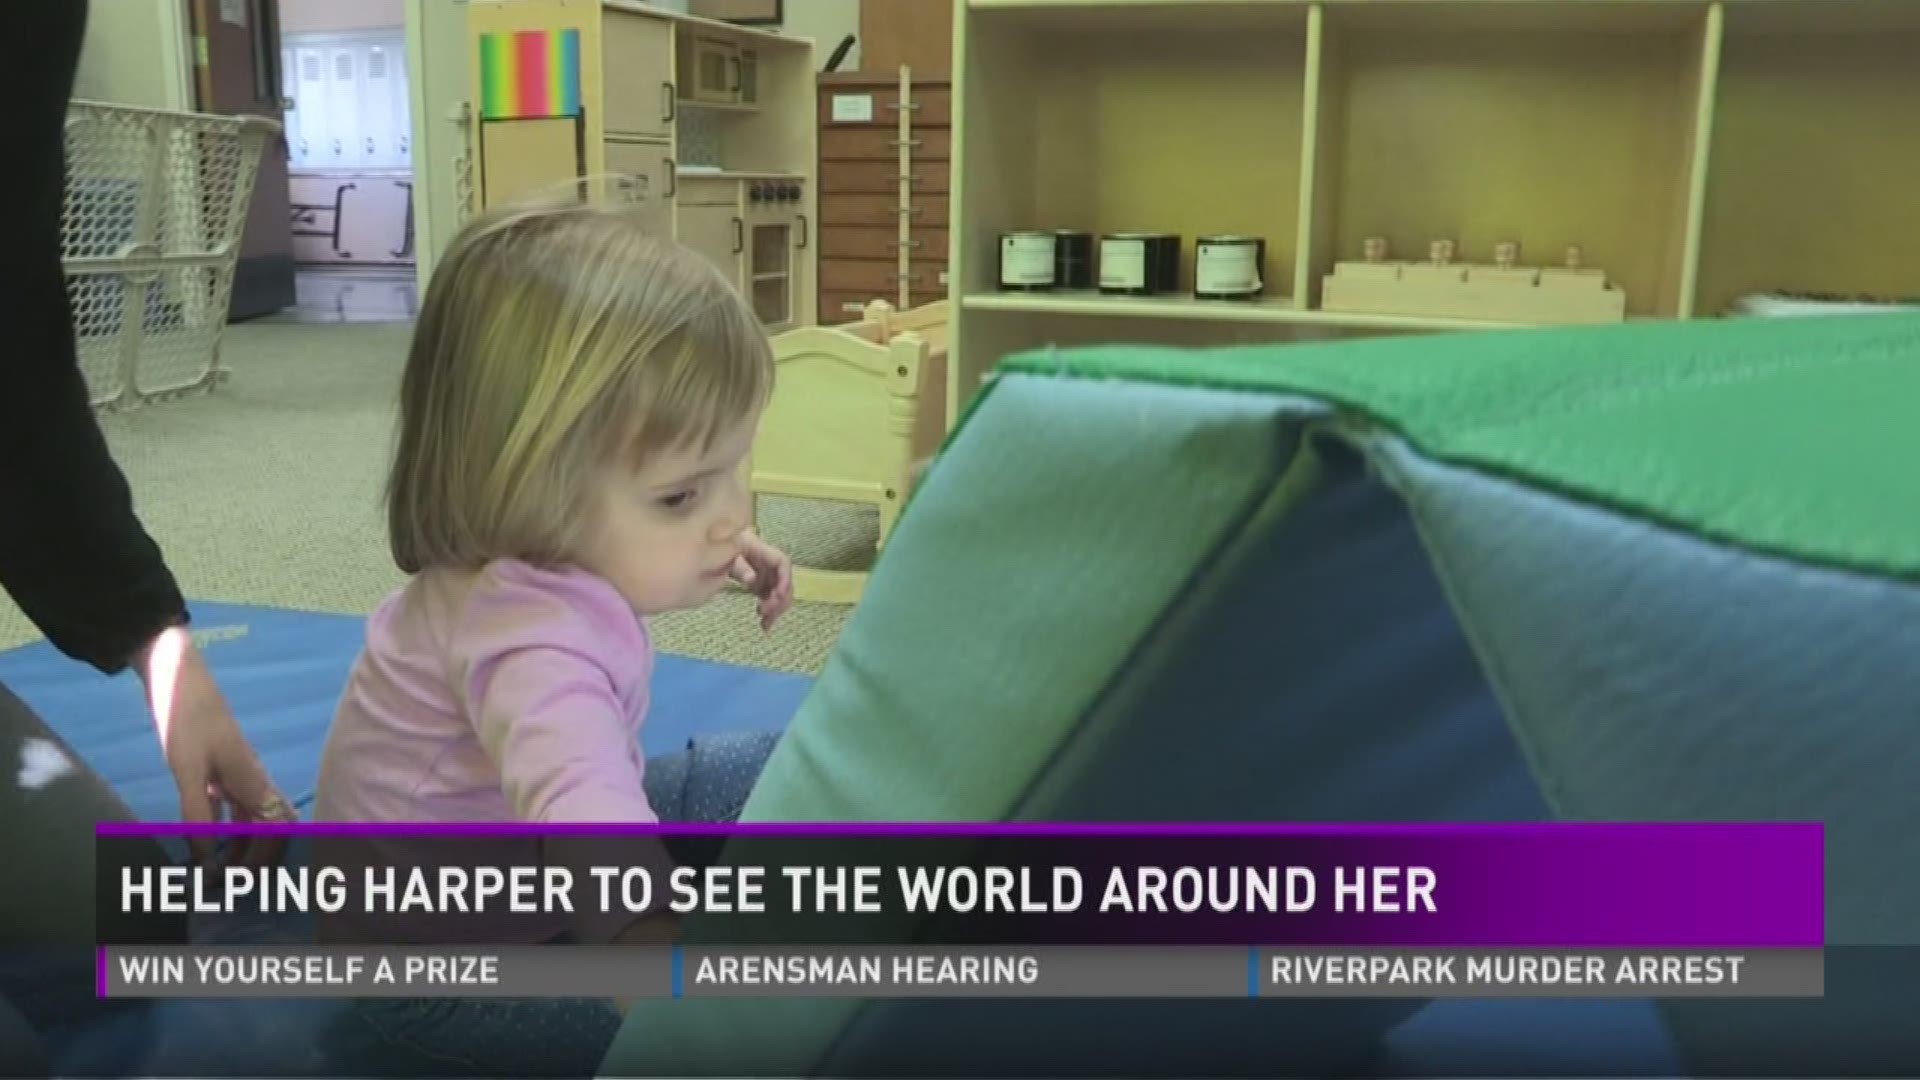 Helping Harper to see the world around her